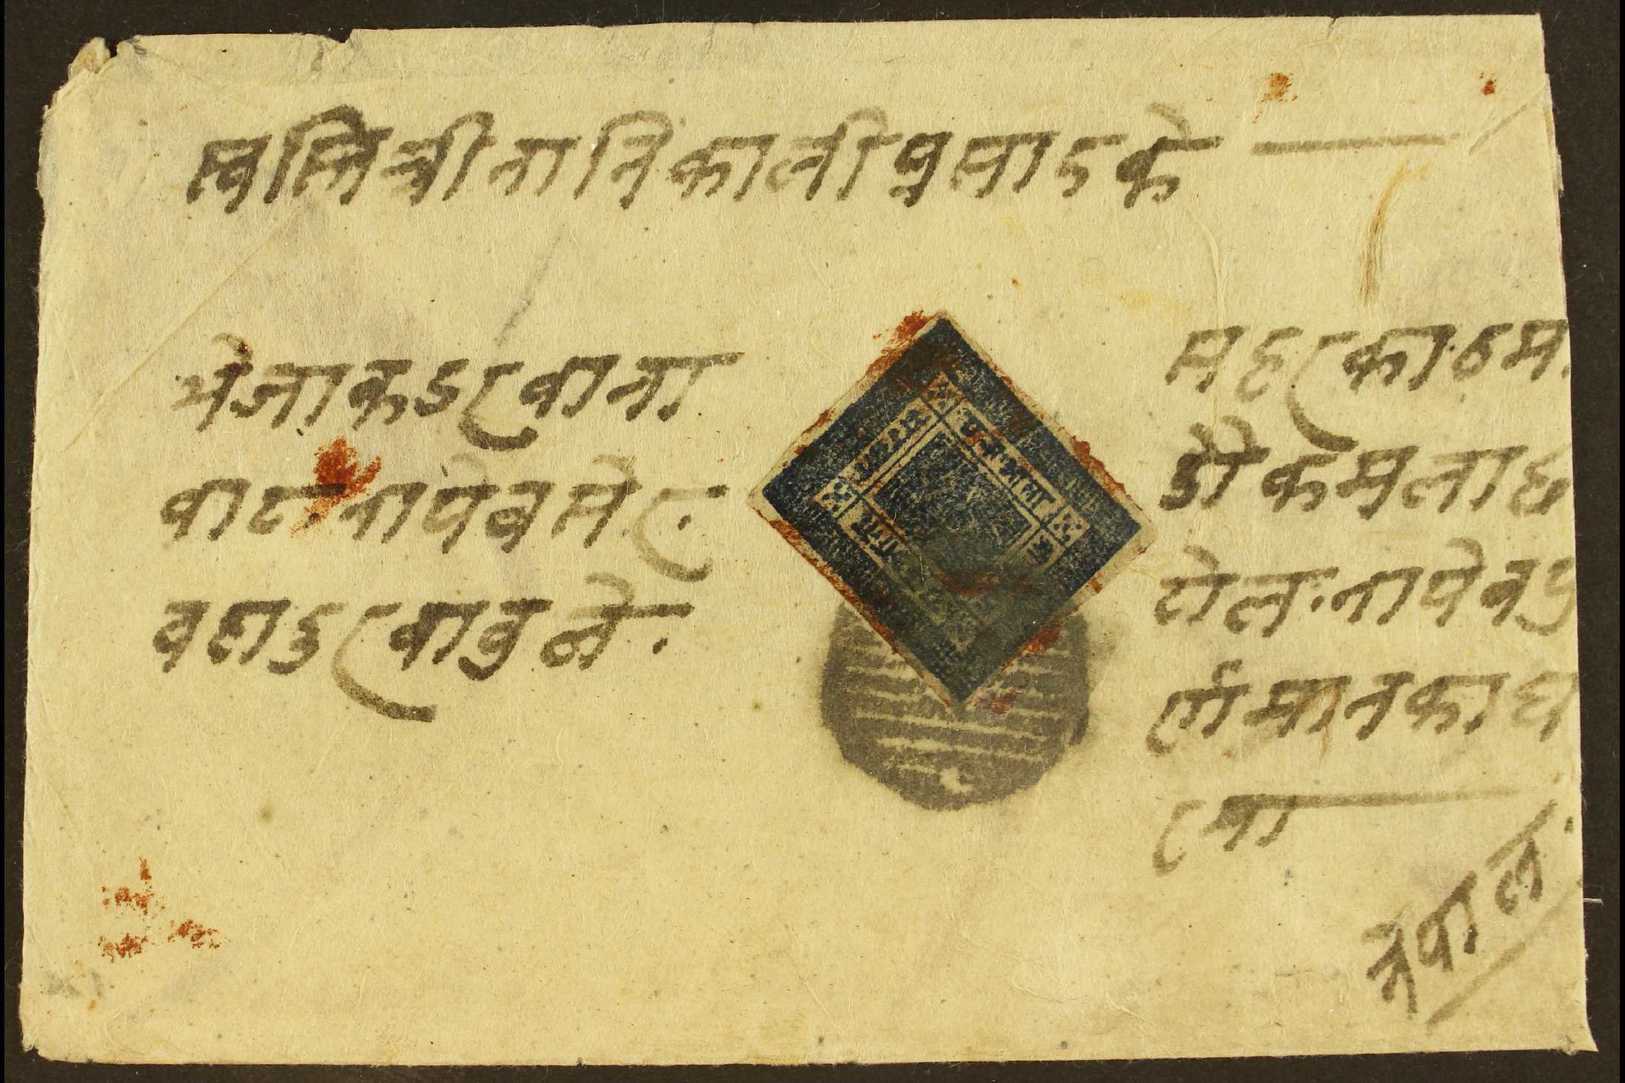 1891  (24th Feb) 1a Blue, Imperf, Blurred Impression On Cover, SG 10, Used On Cover From Kadarban To Kathmandu. For More - Népal